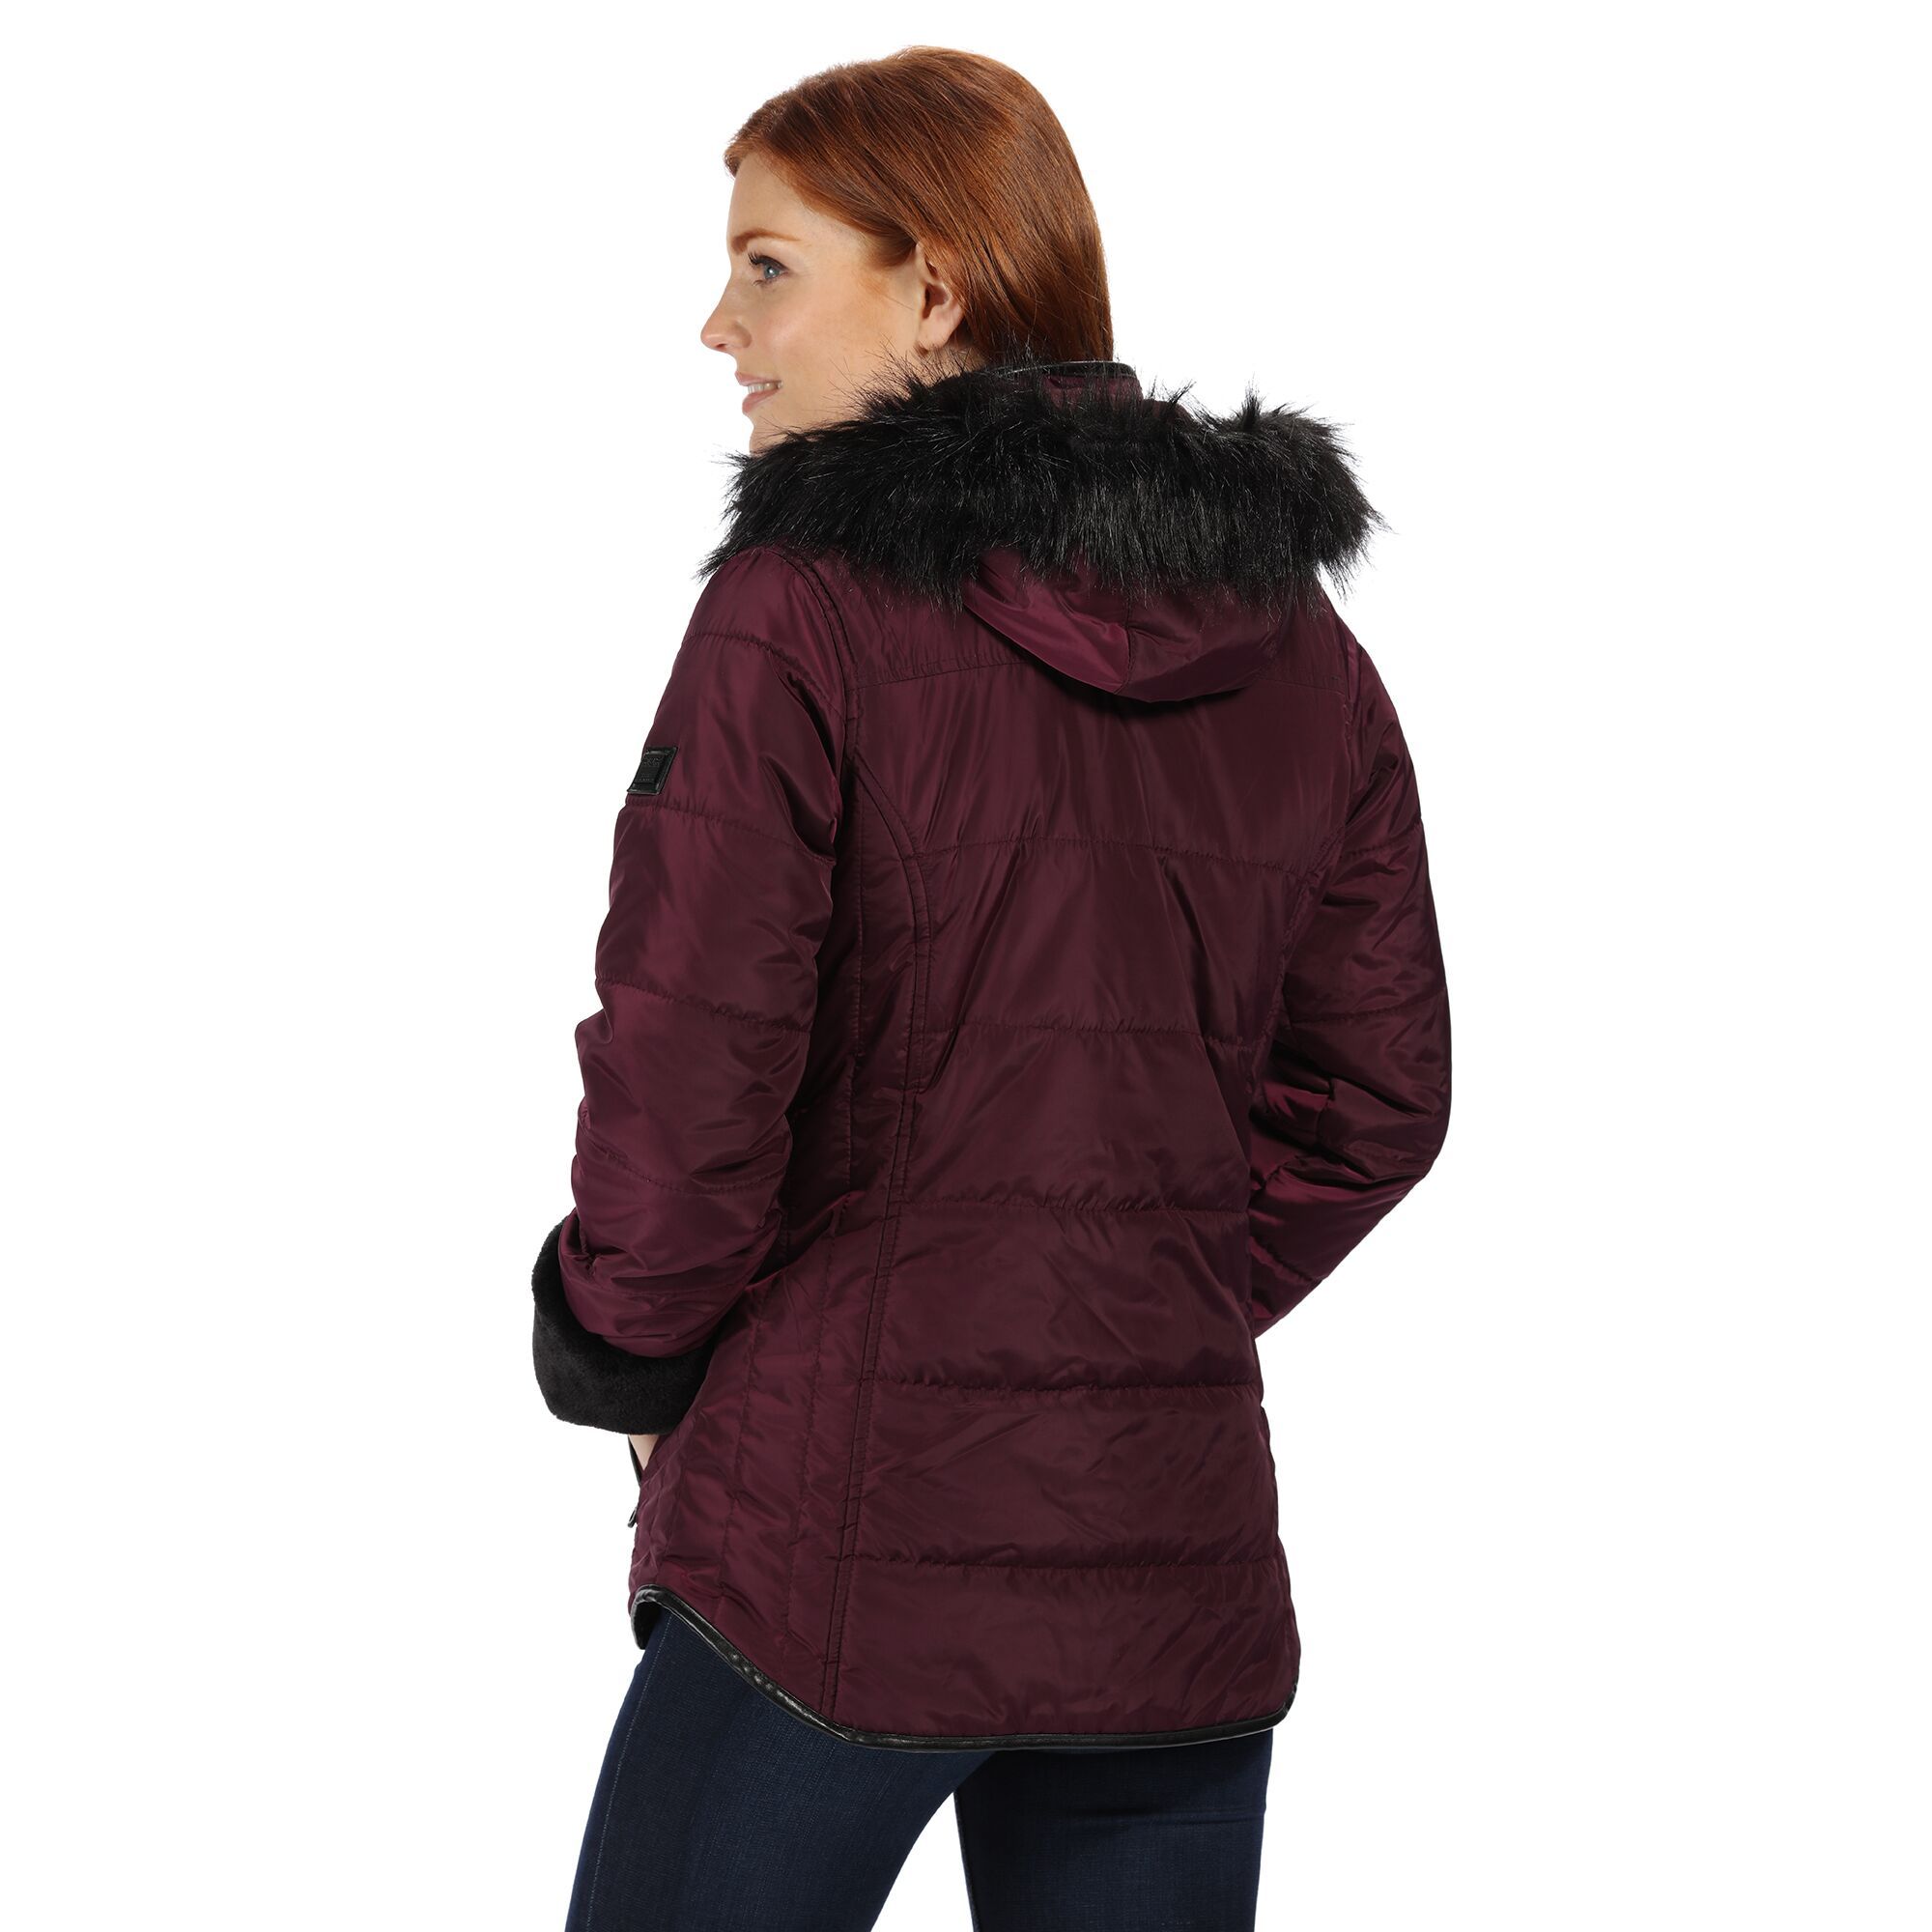 Material: 100% polyester. Cut from high-shine showerproof fabric with shape-defining seams and warming insulation. The outer is baffle lined with Thermoguard fill to stave off cold weather. Inside soft-touch lining and fine quality faux-fur trims add an extra layer of comfort. Features an internal security pocket and 2 zipped lower warm lined pockets. With a special expanding zip feature to the hood so you can wear it oversized. Lined with beautifully soft faux-fur. A shaped hem and leatherette trims add the finishing touch. With the Regatta Outdoors badge on the left sleeve. Size (chest): (6 UK) 30in, (8 UK) 32in, (10 UK) 34in, (12 UK) 36in, (14 UK) 38in, (16 UK) 40in, (18 UK) 43in, (20 UK) 45in, (22 UK) 48in, (24 UK) 50in, (28 UK) 54in, (30 UK) 56in, (32 UK) 58in, (34 UK) 60in, (36 UK) 62in.